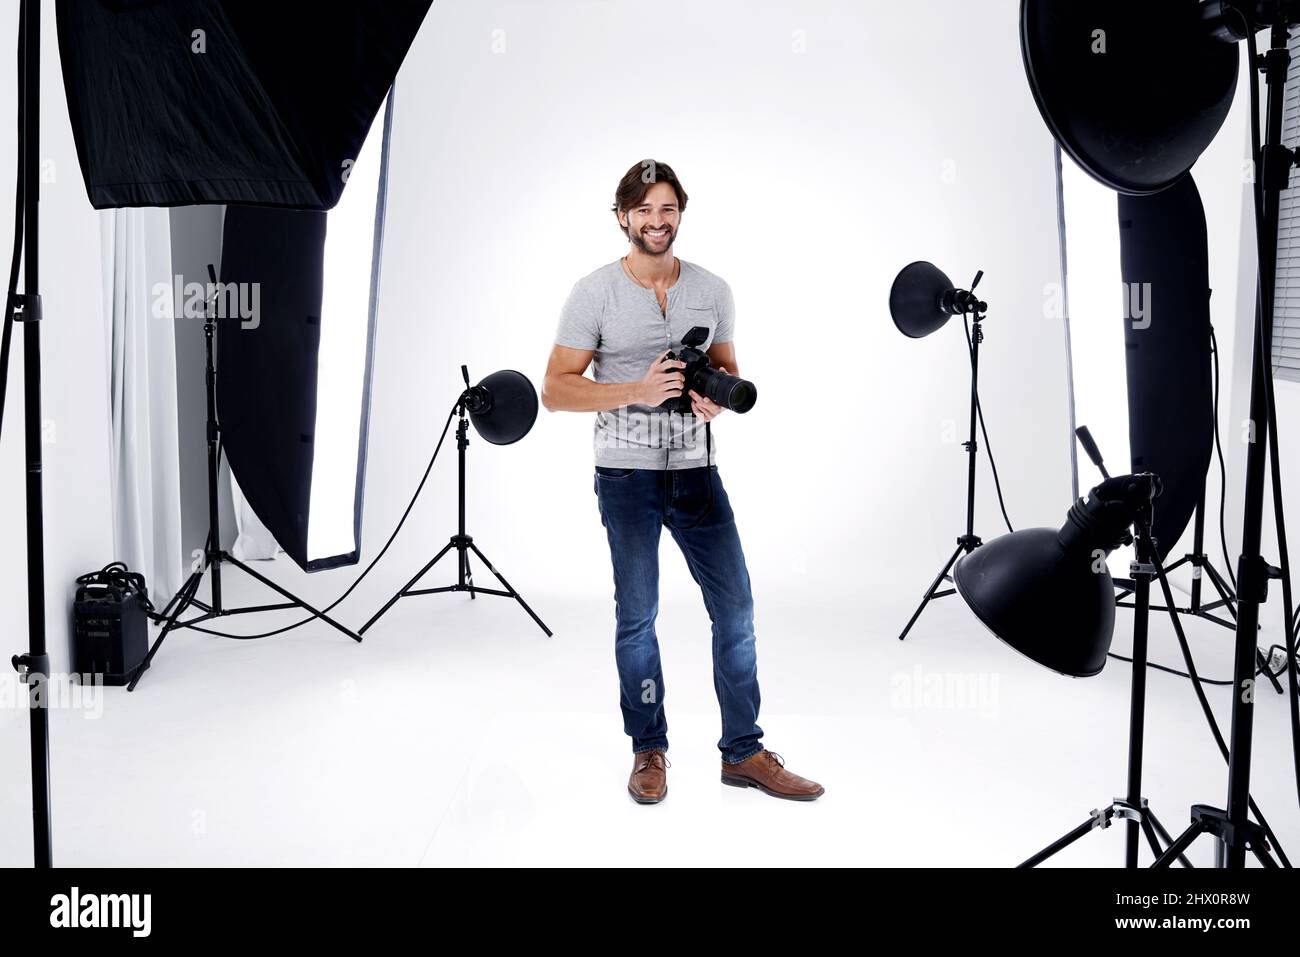 Read..,Aim...Shoot. A professional photographer in his studio. Stock Photo